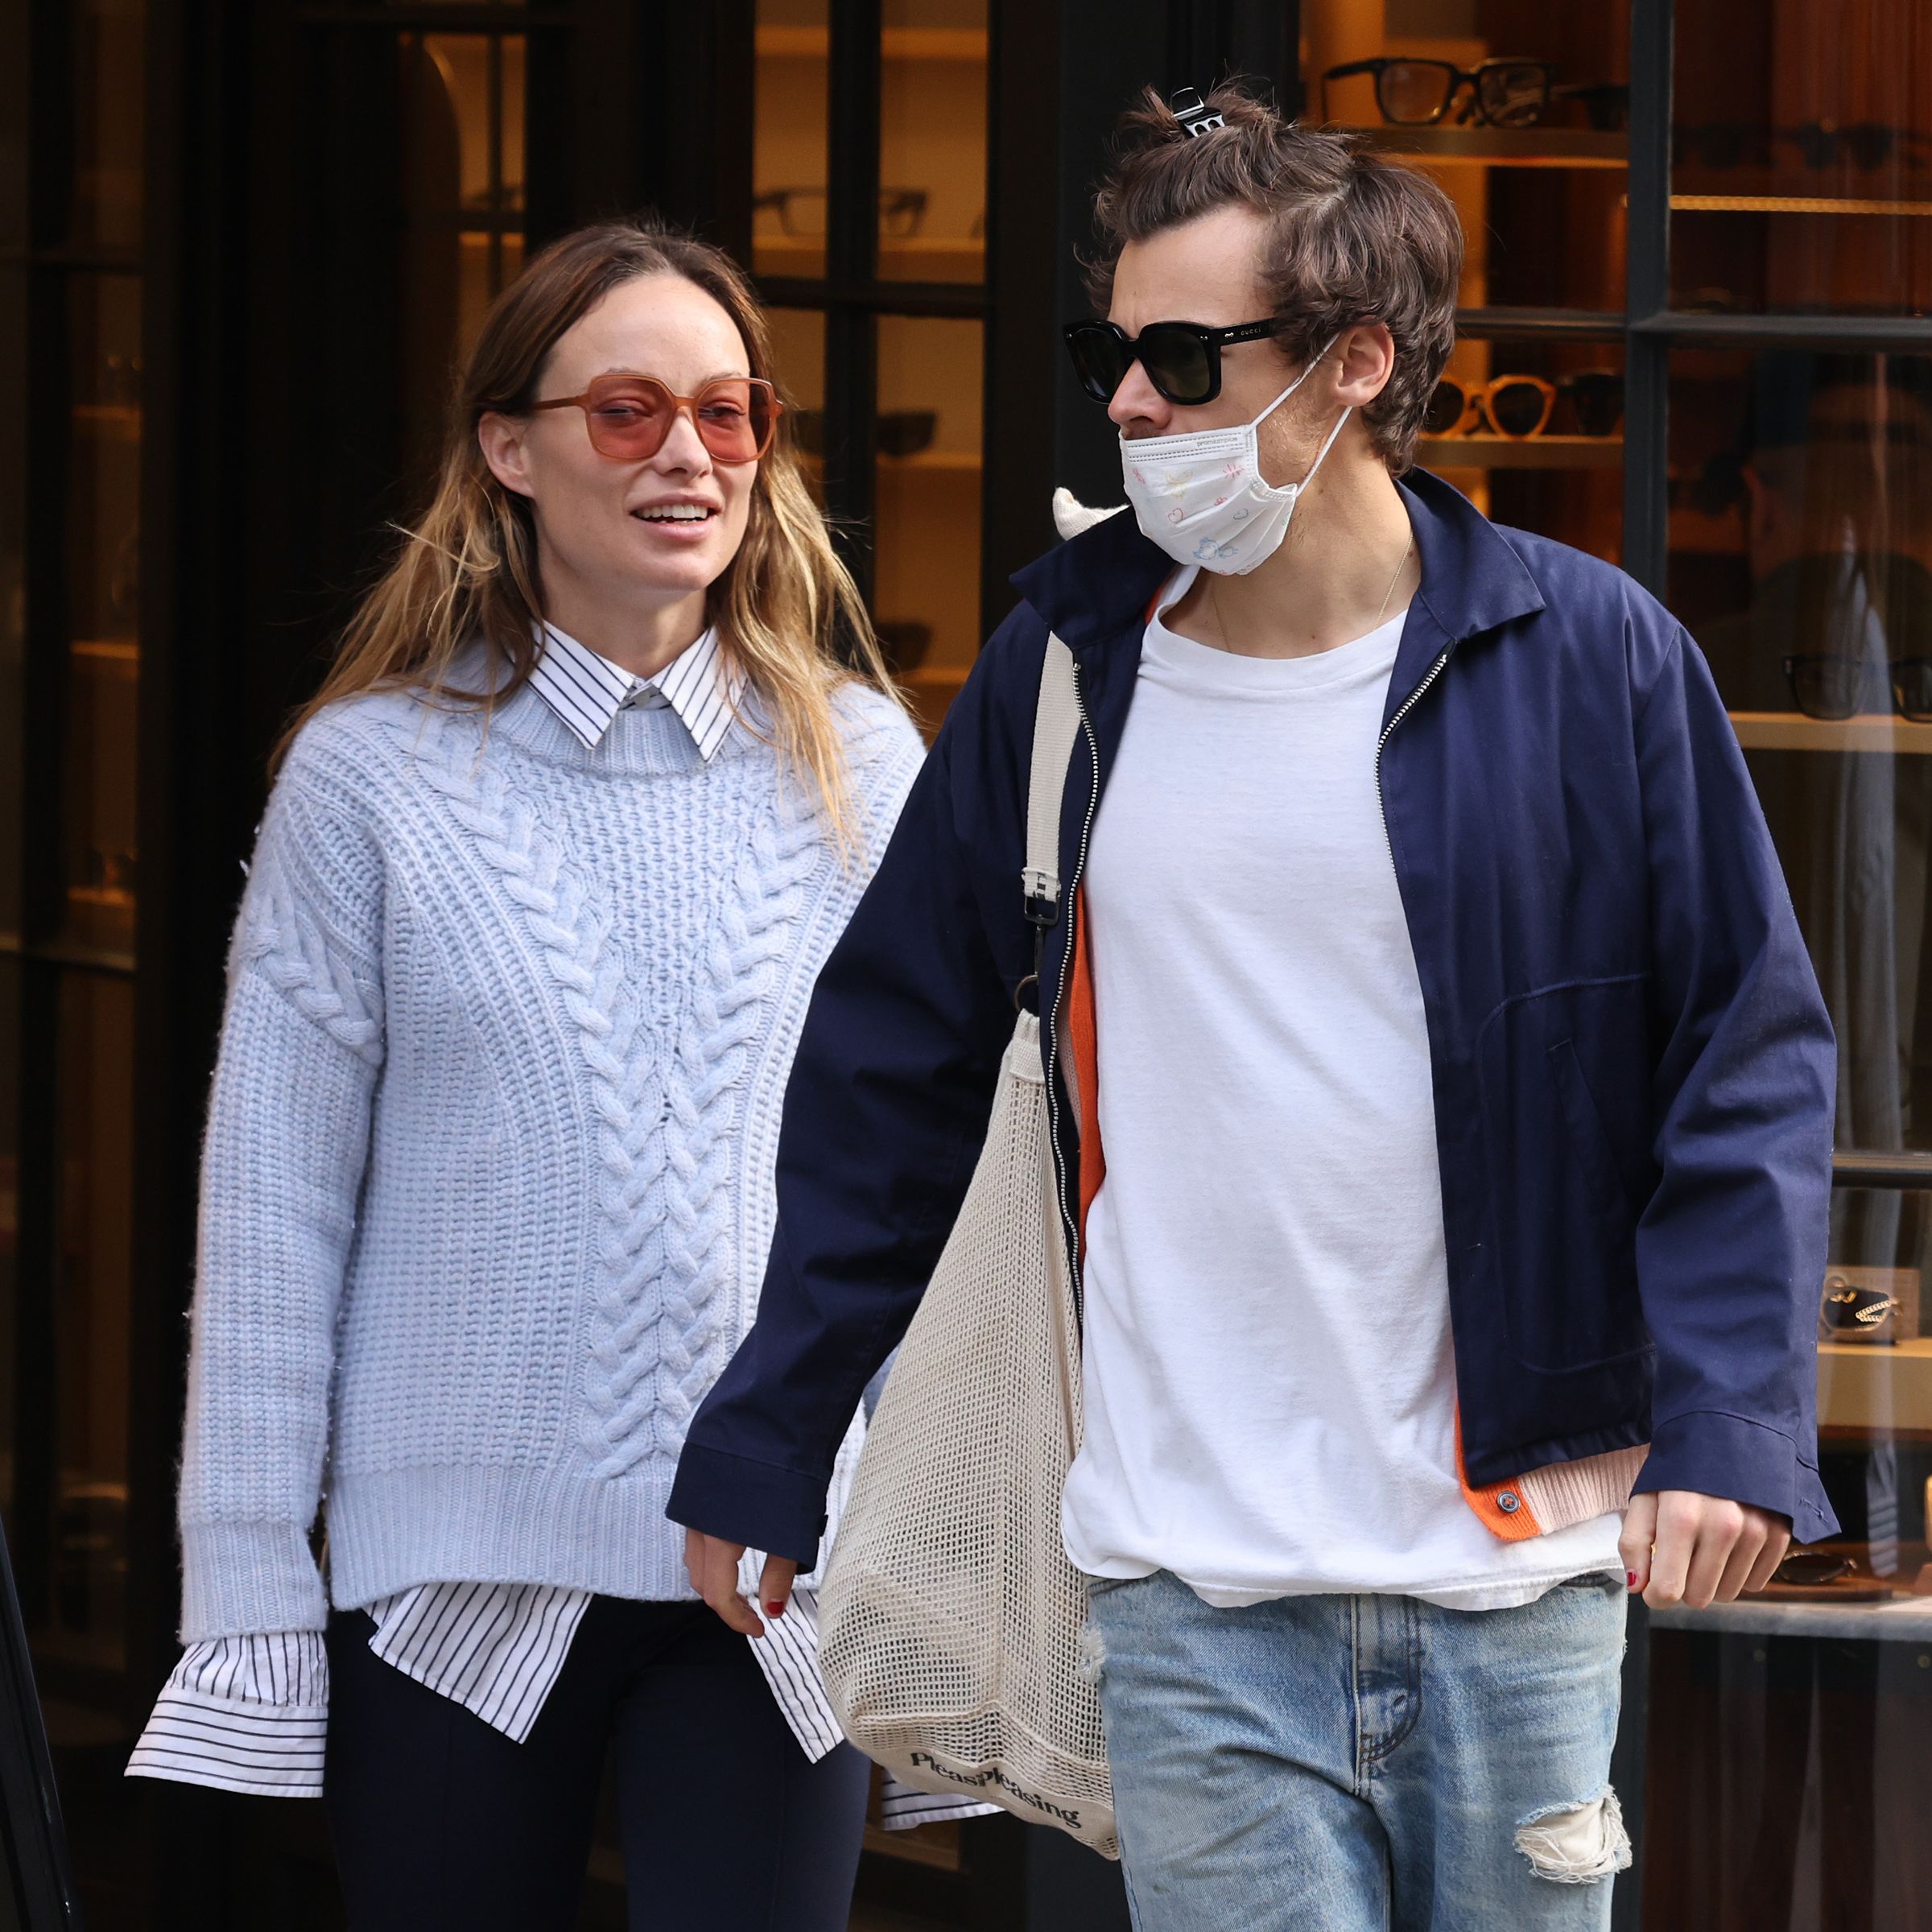 Harry Styles and Olivia Wilde Have Broken Up After Almost 2 Years of Dating